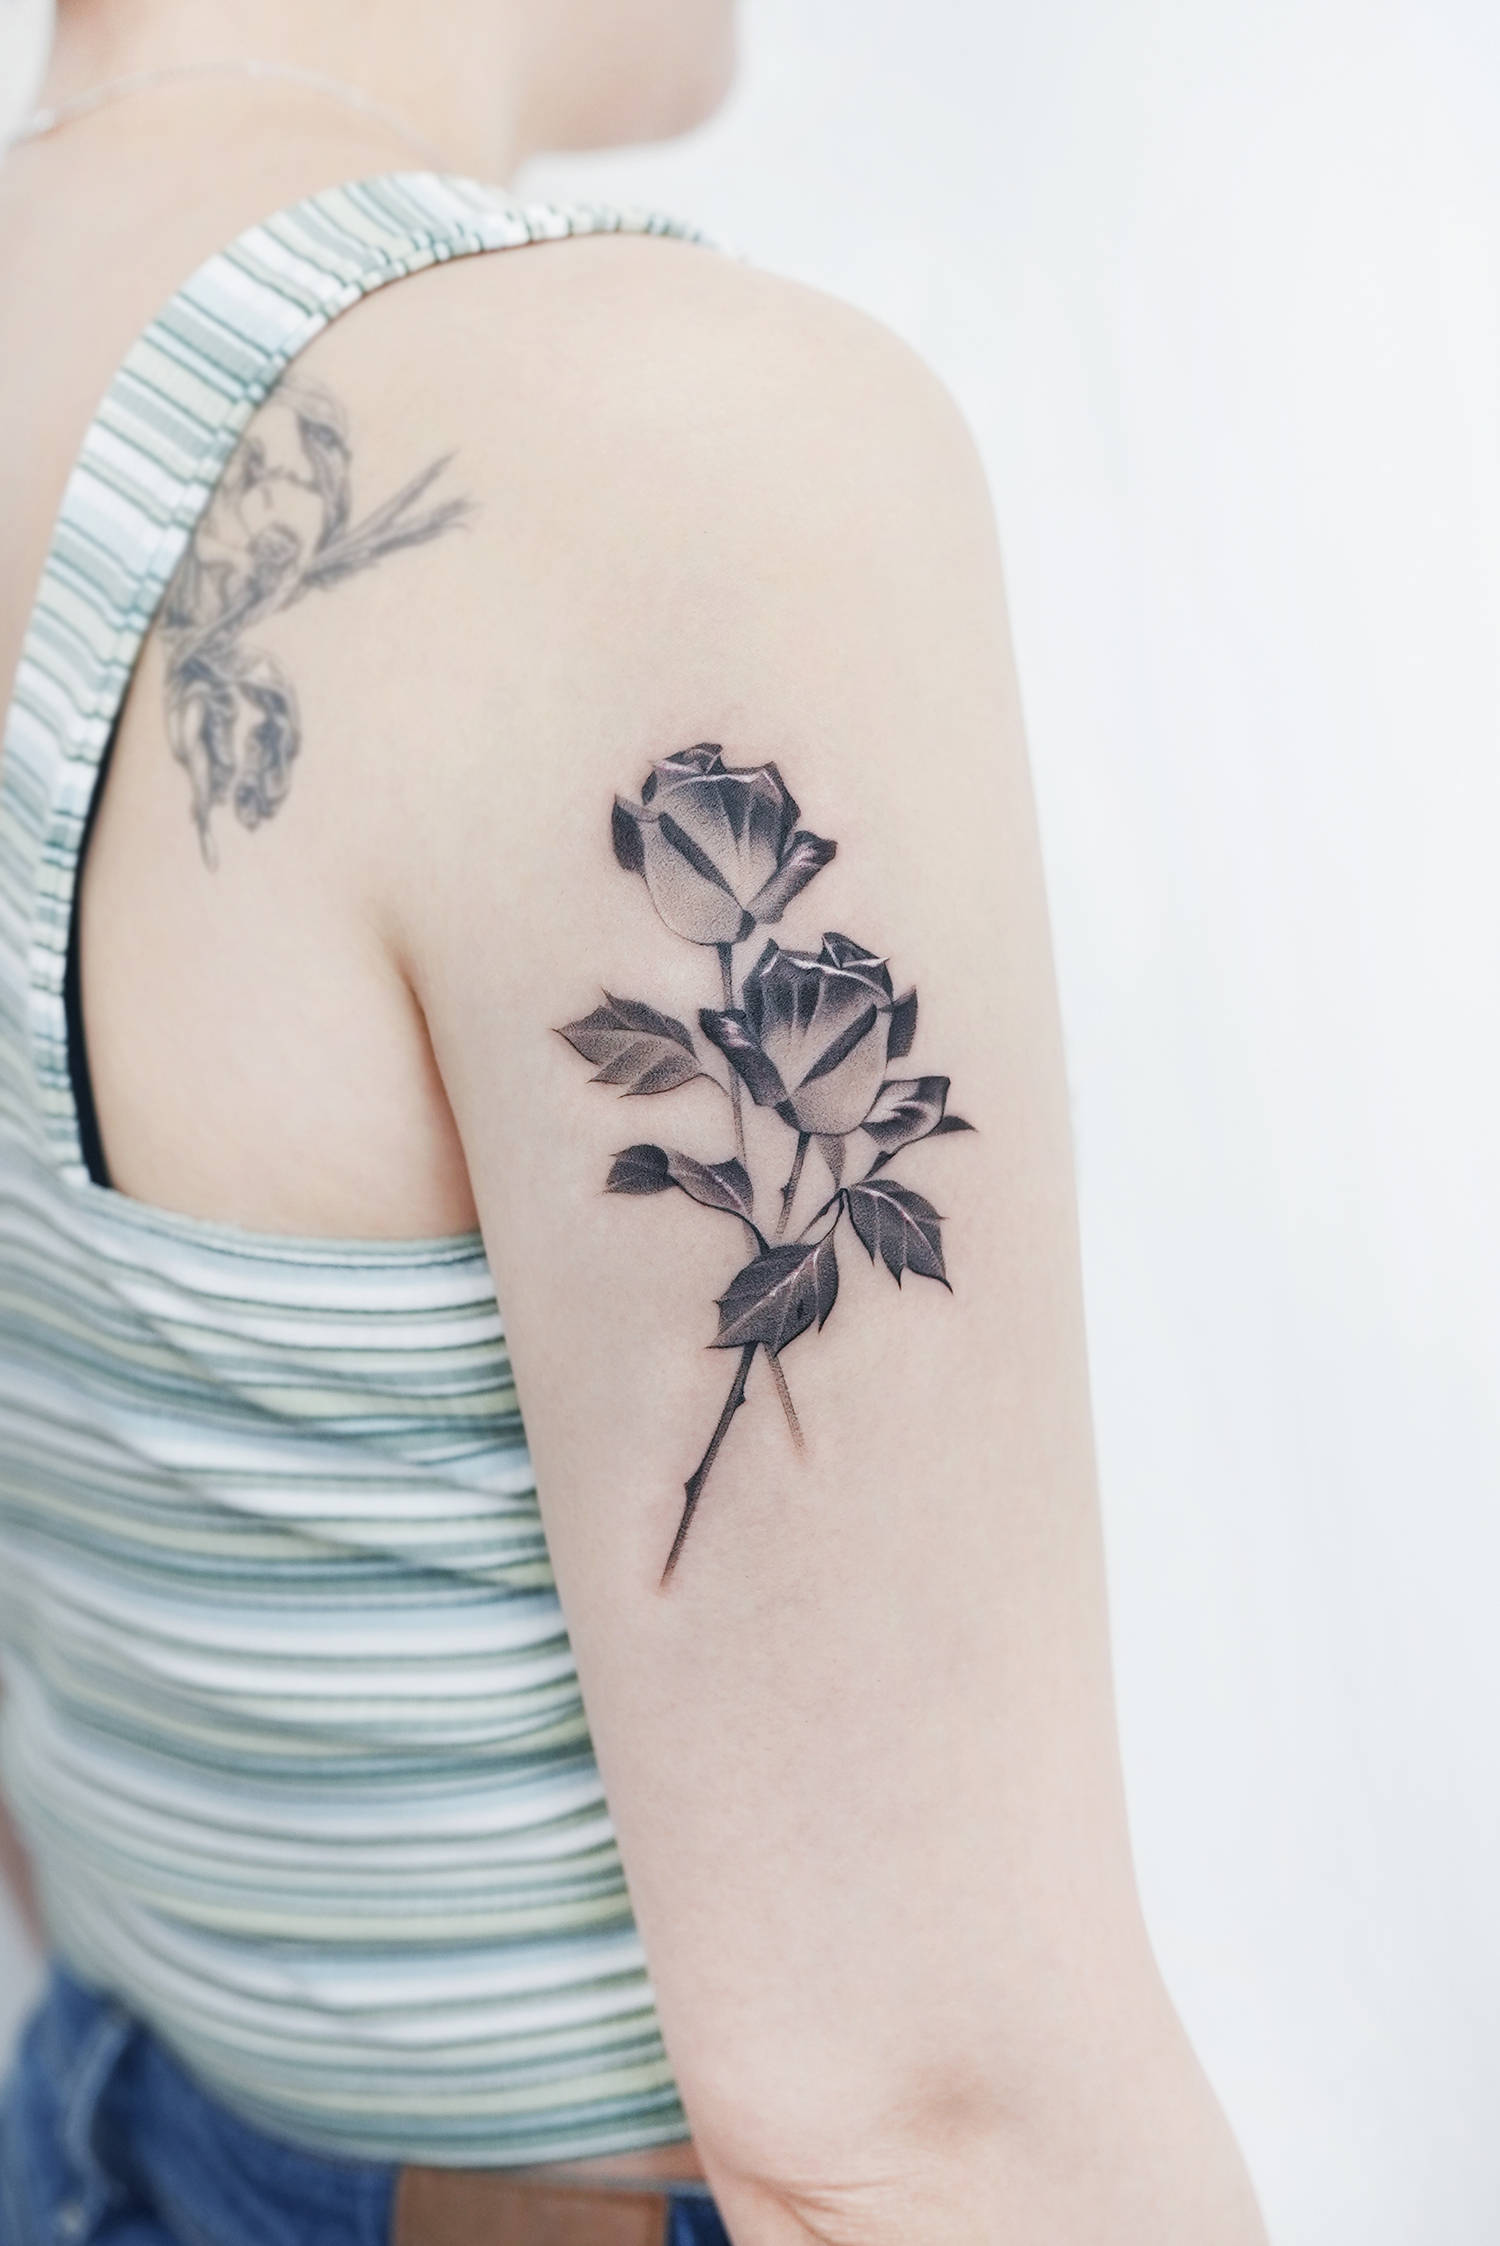 black and grey rose tattoos on arm